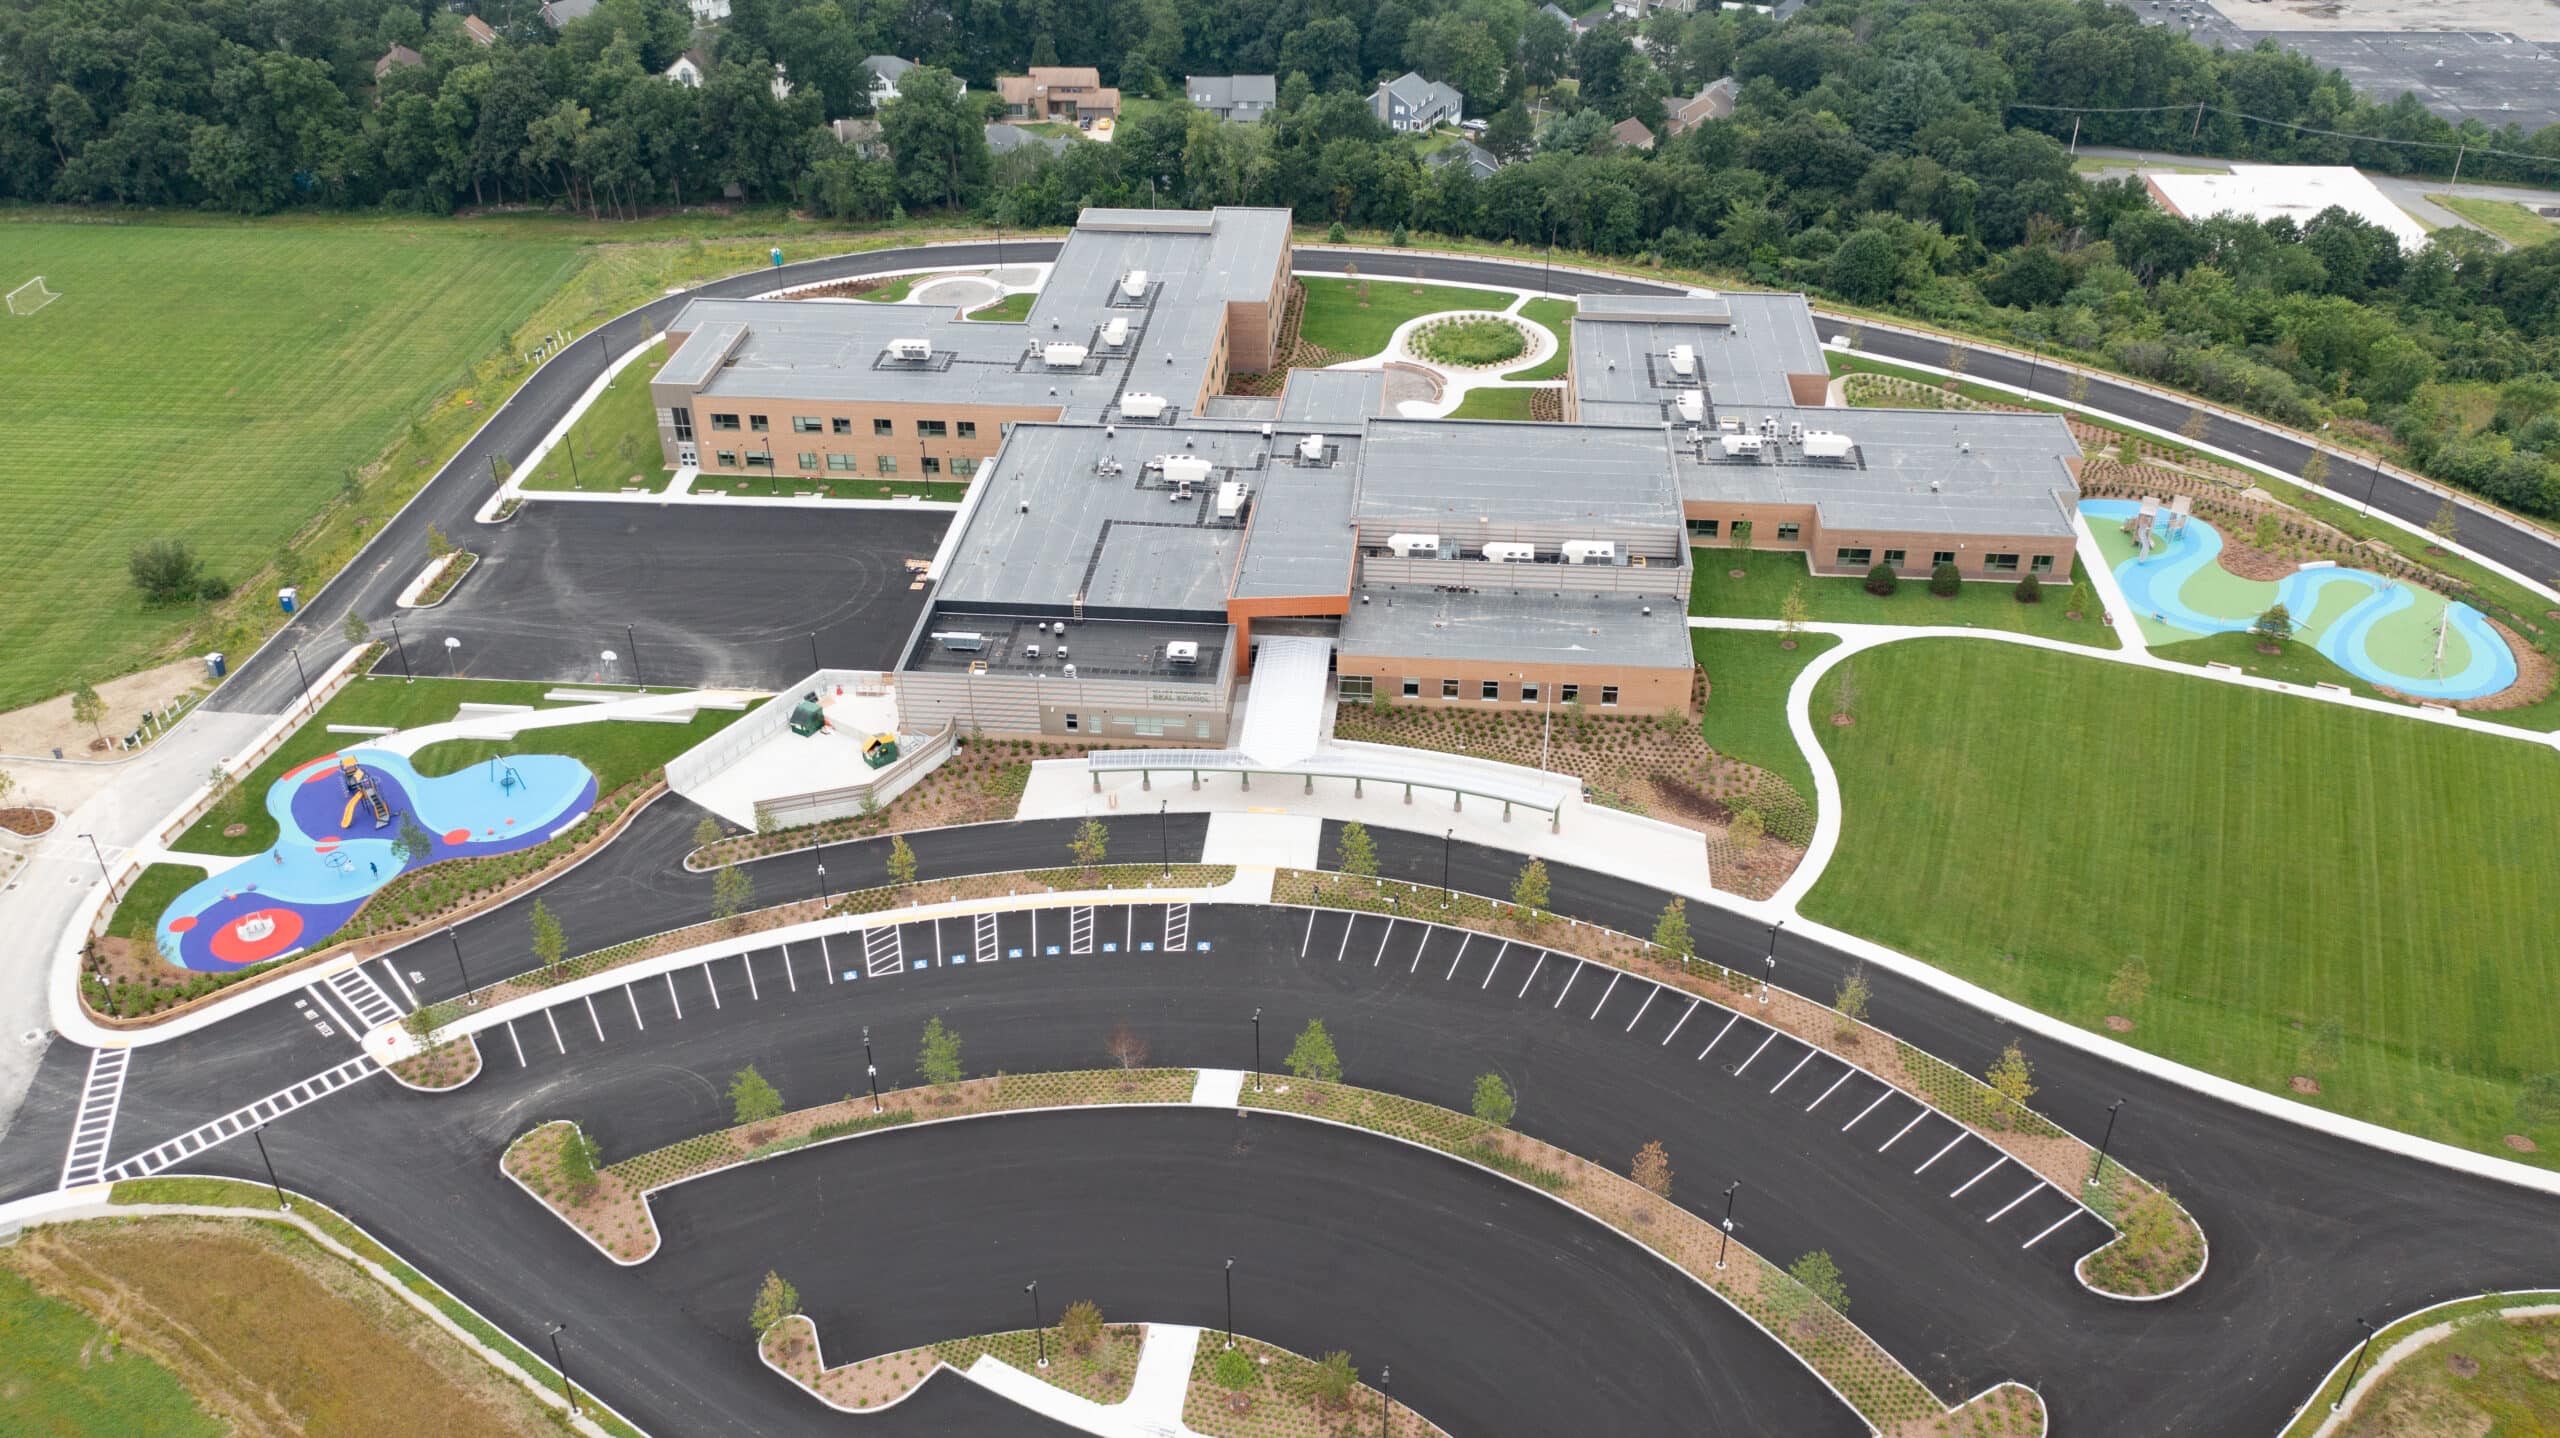 Drone photo of new Beal School, which is almost complete.